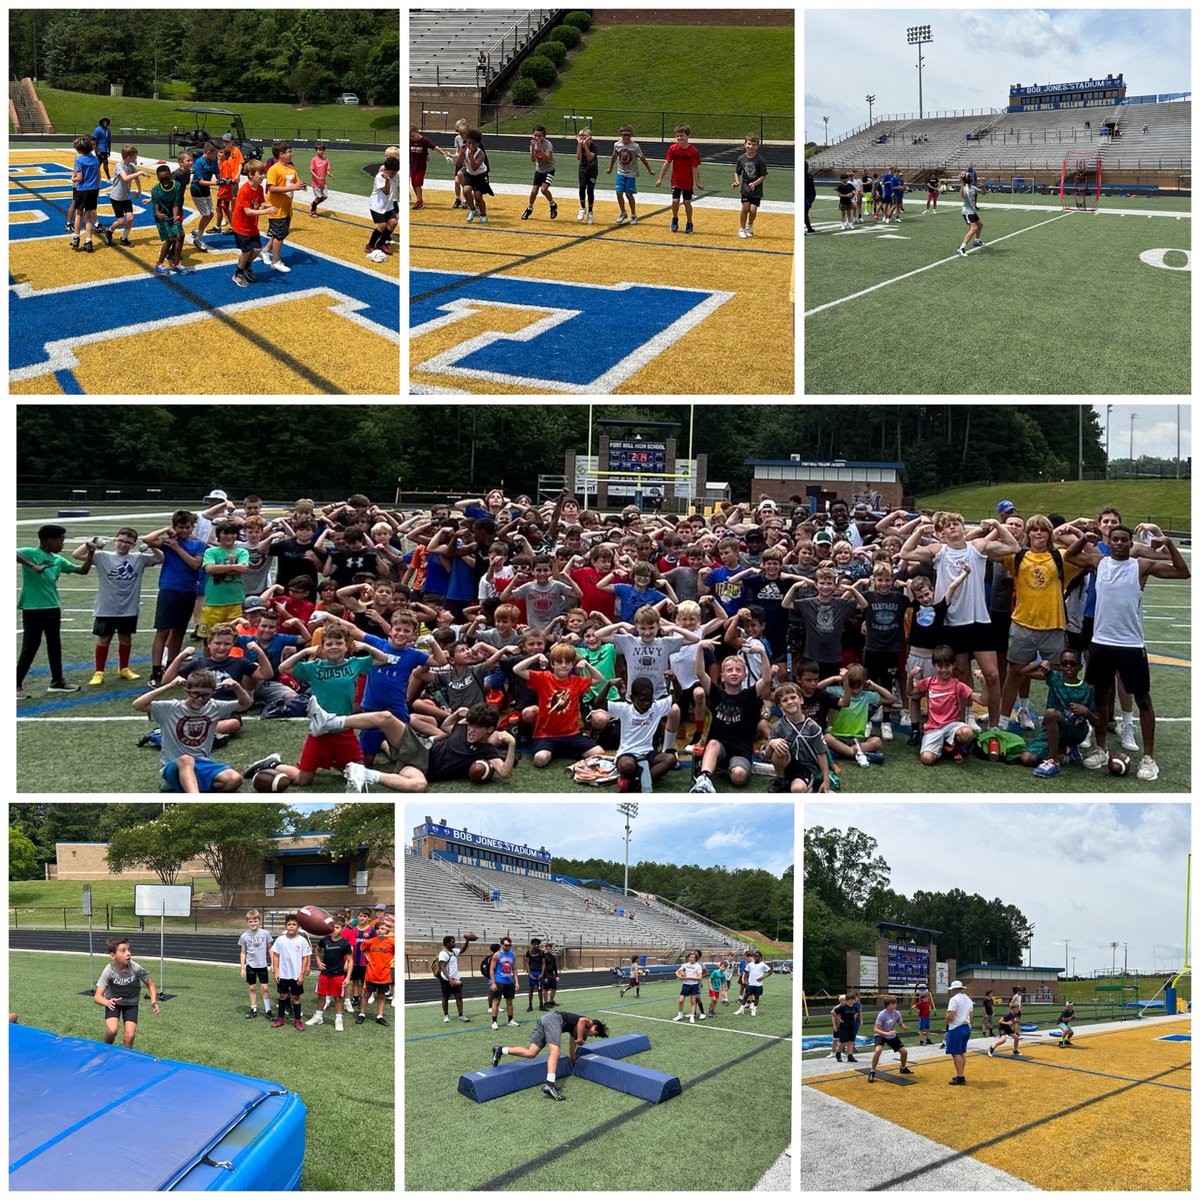 #WE had a great 1st day at camp! Beelieve everyone had a blast!